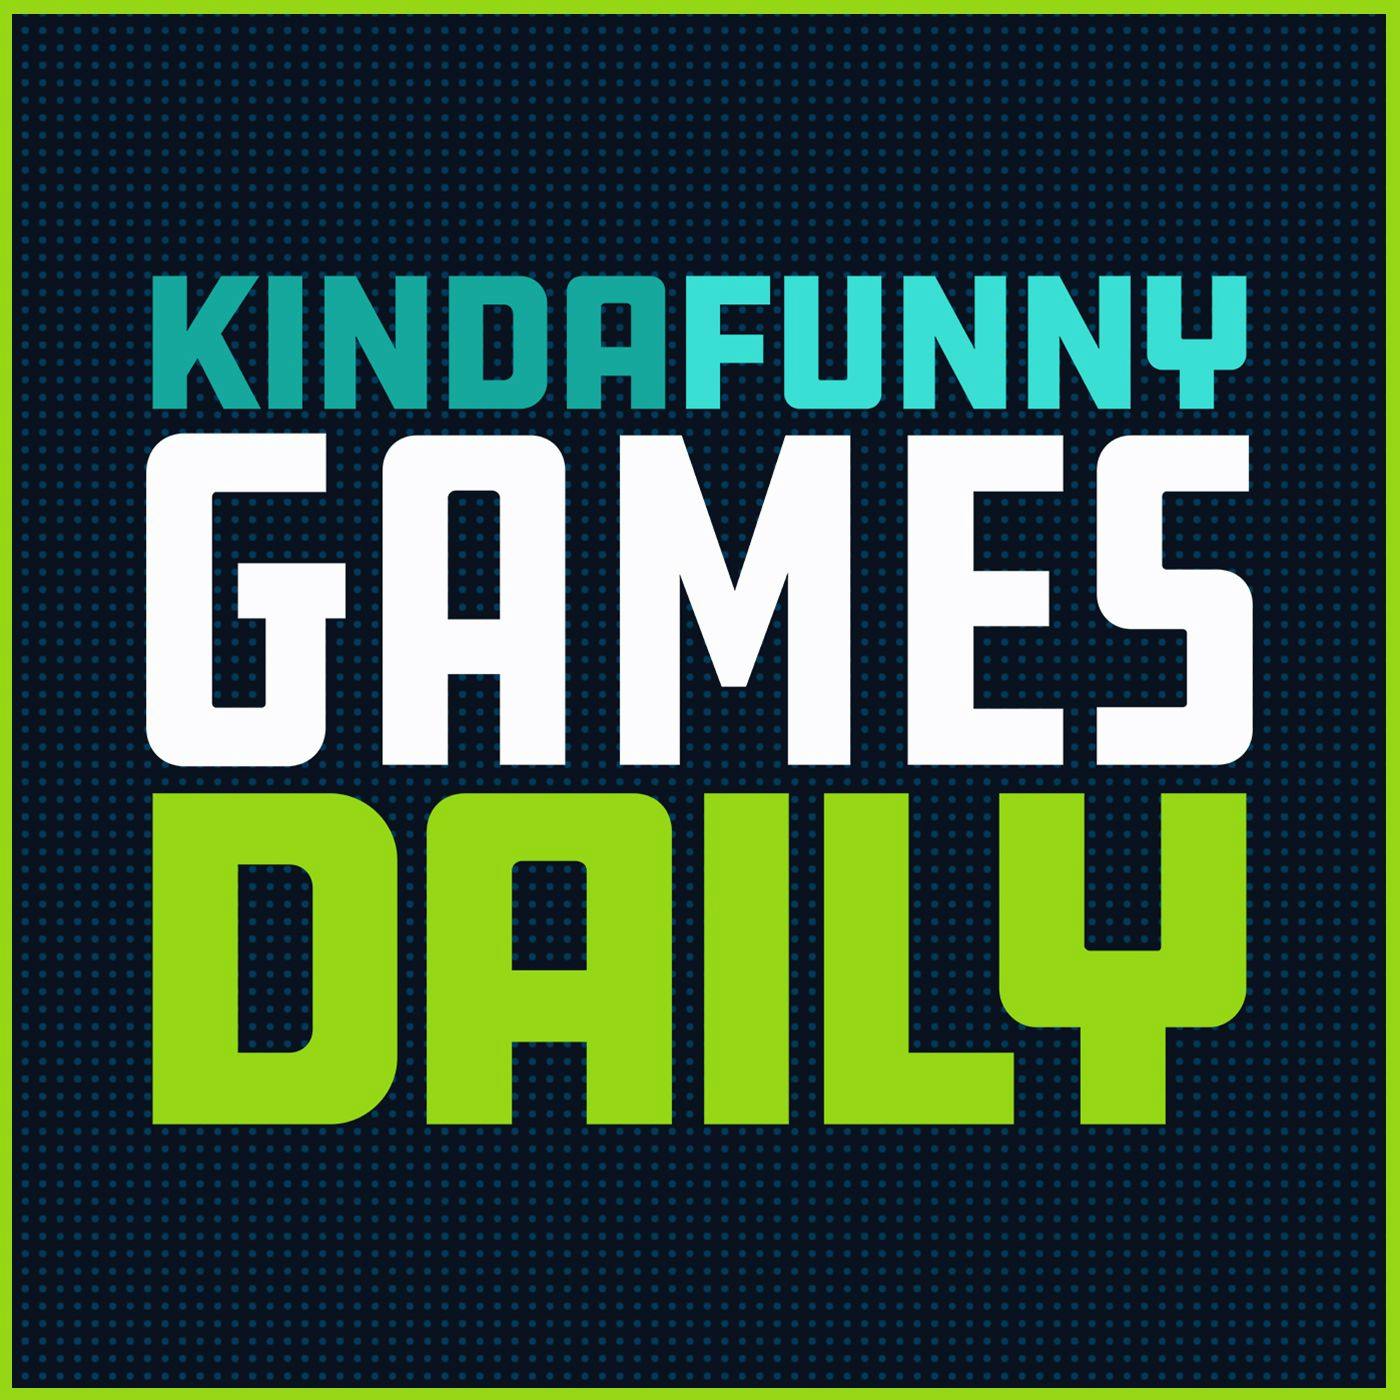 There’s a New Cyberpunk 2077 Xbox One - Kinda Funny Games Daily 04.20.20